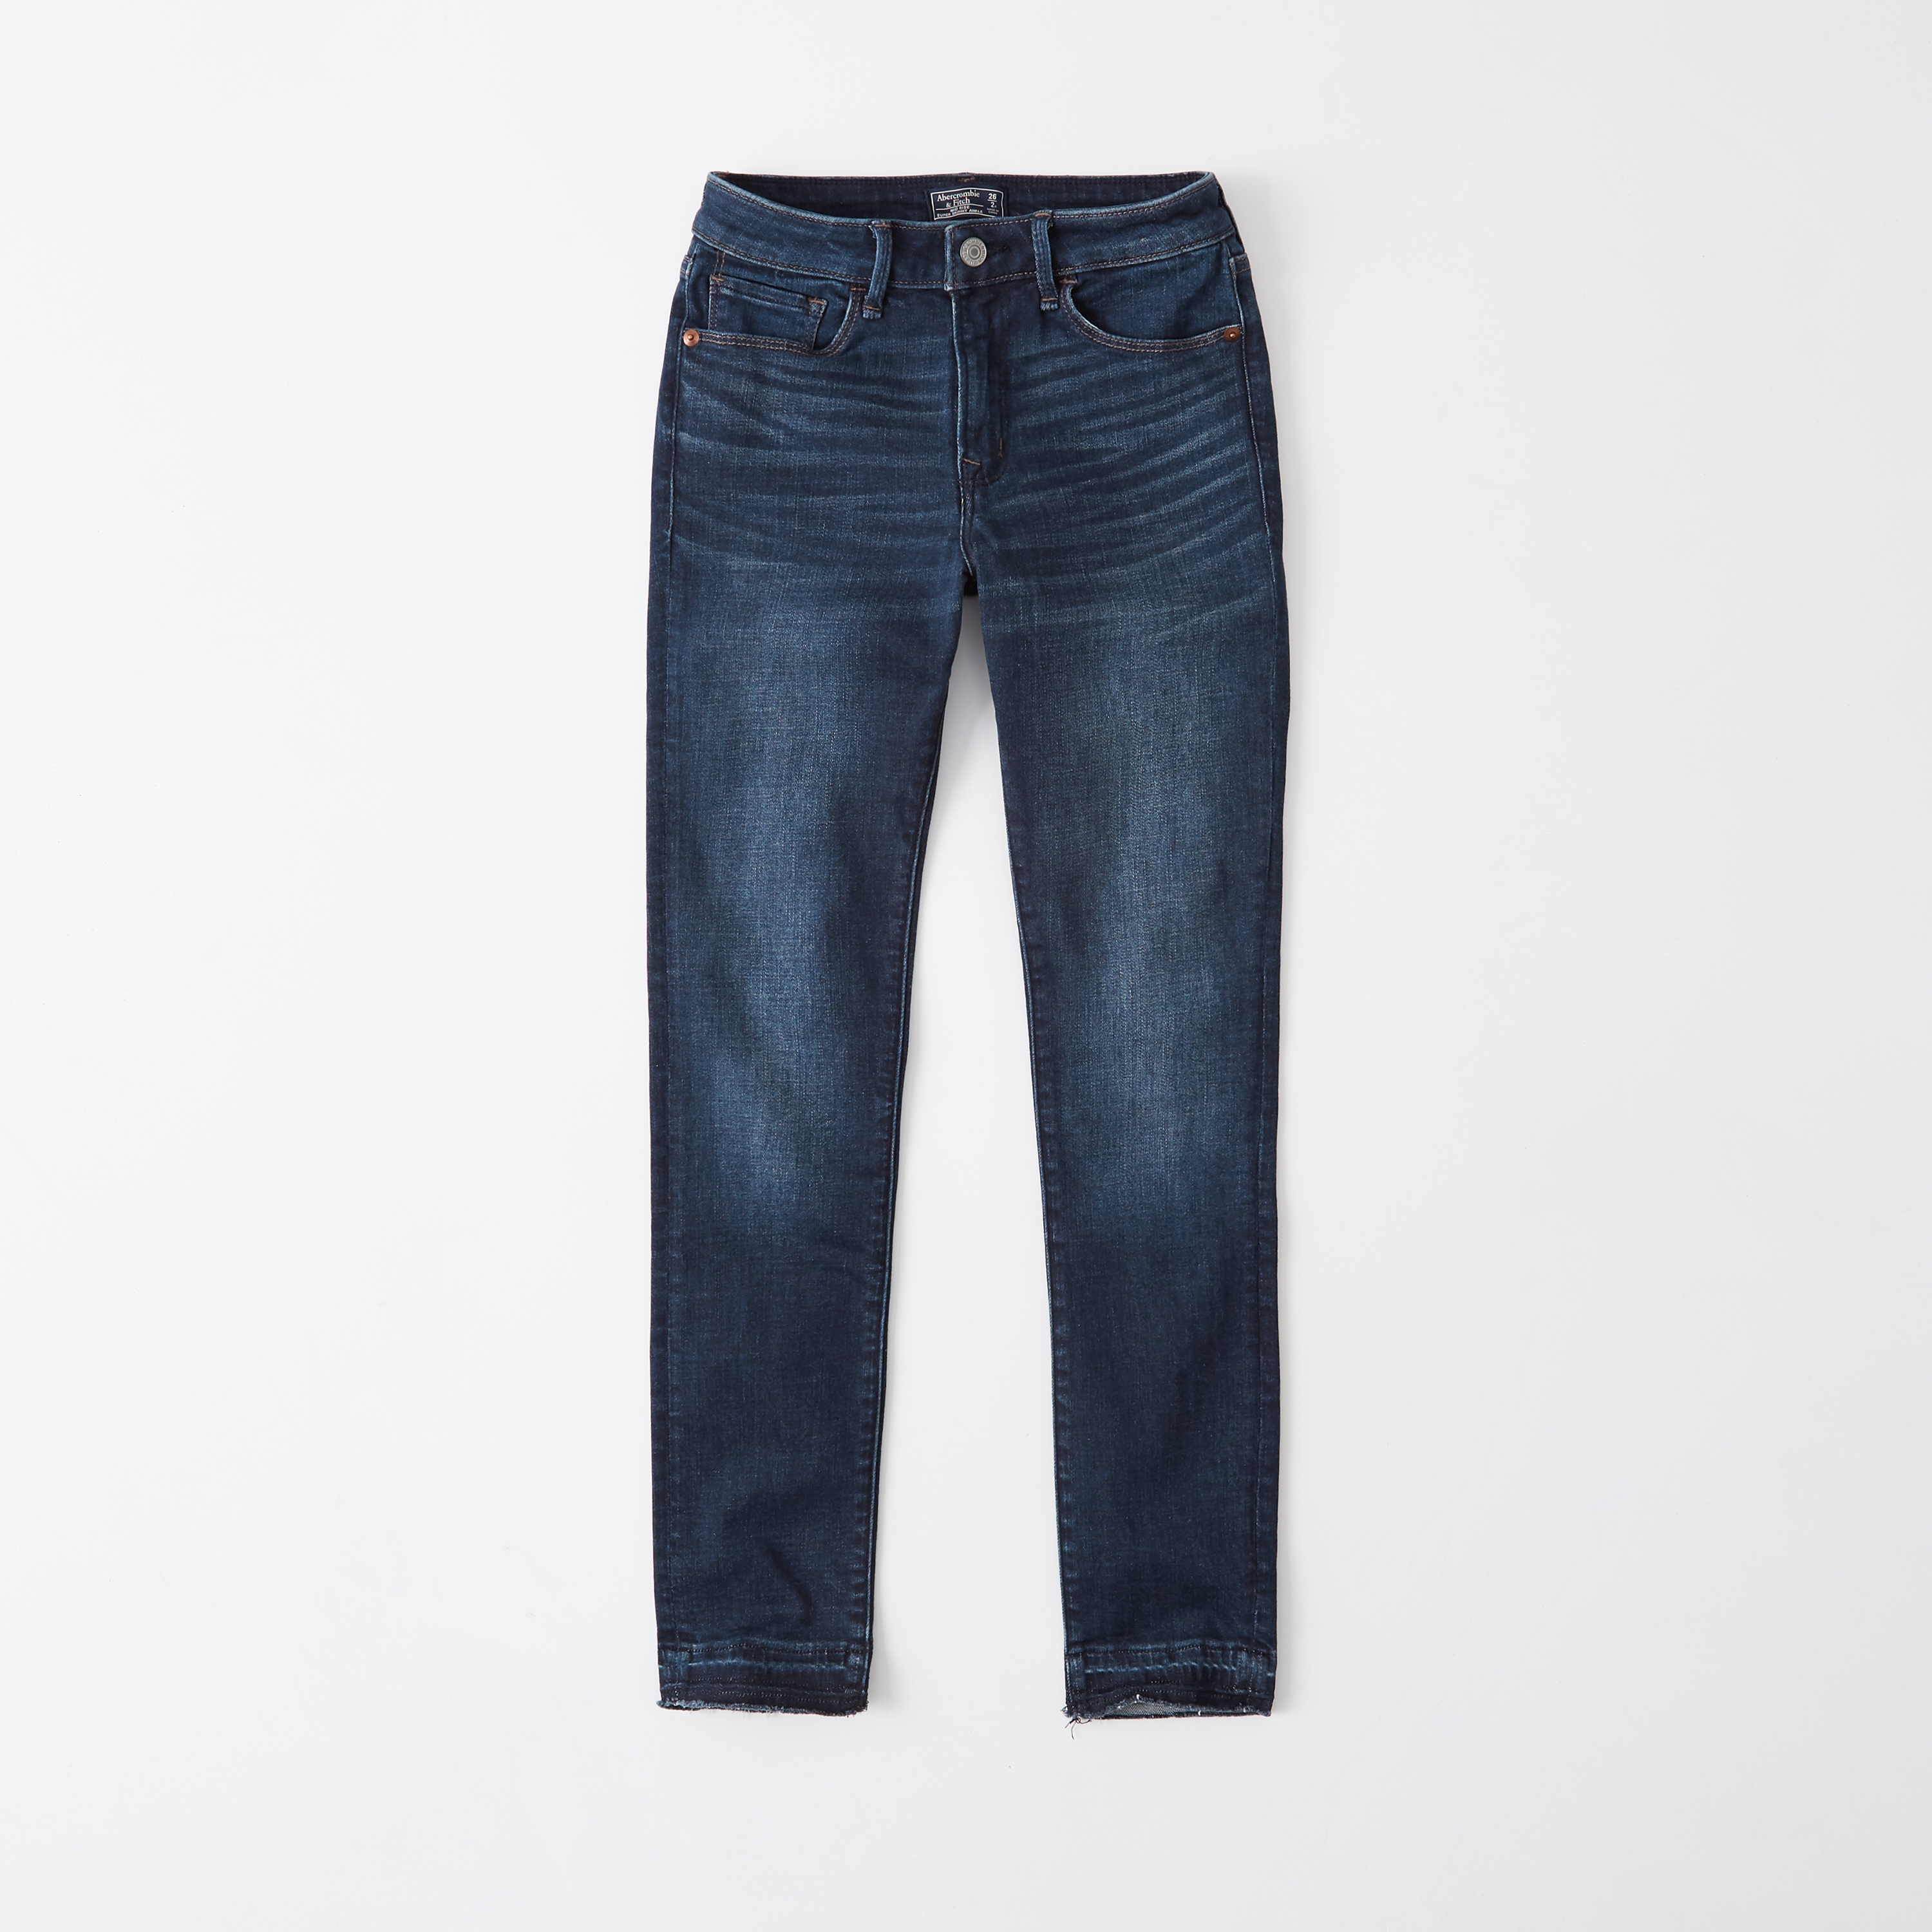 abercrombie & fitch mid rise super skinny ankle jeans